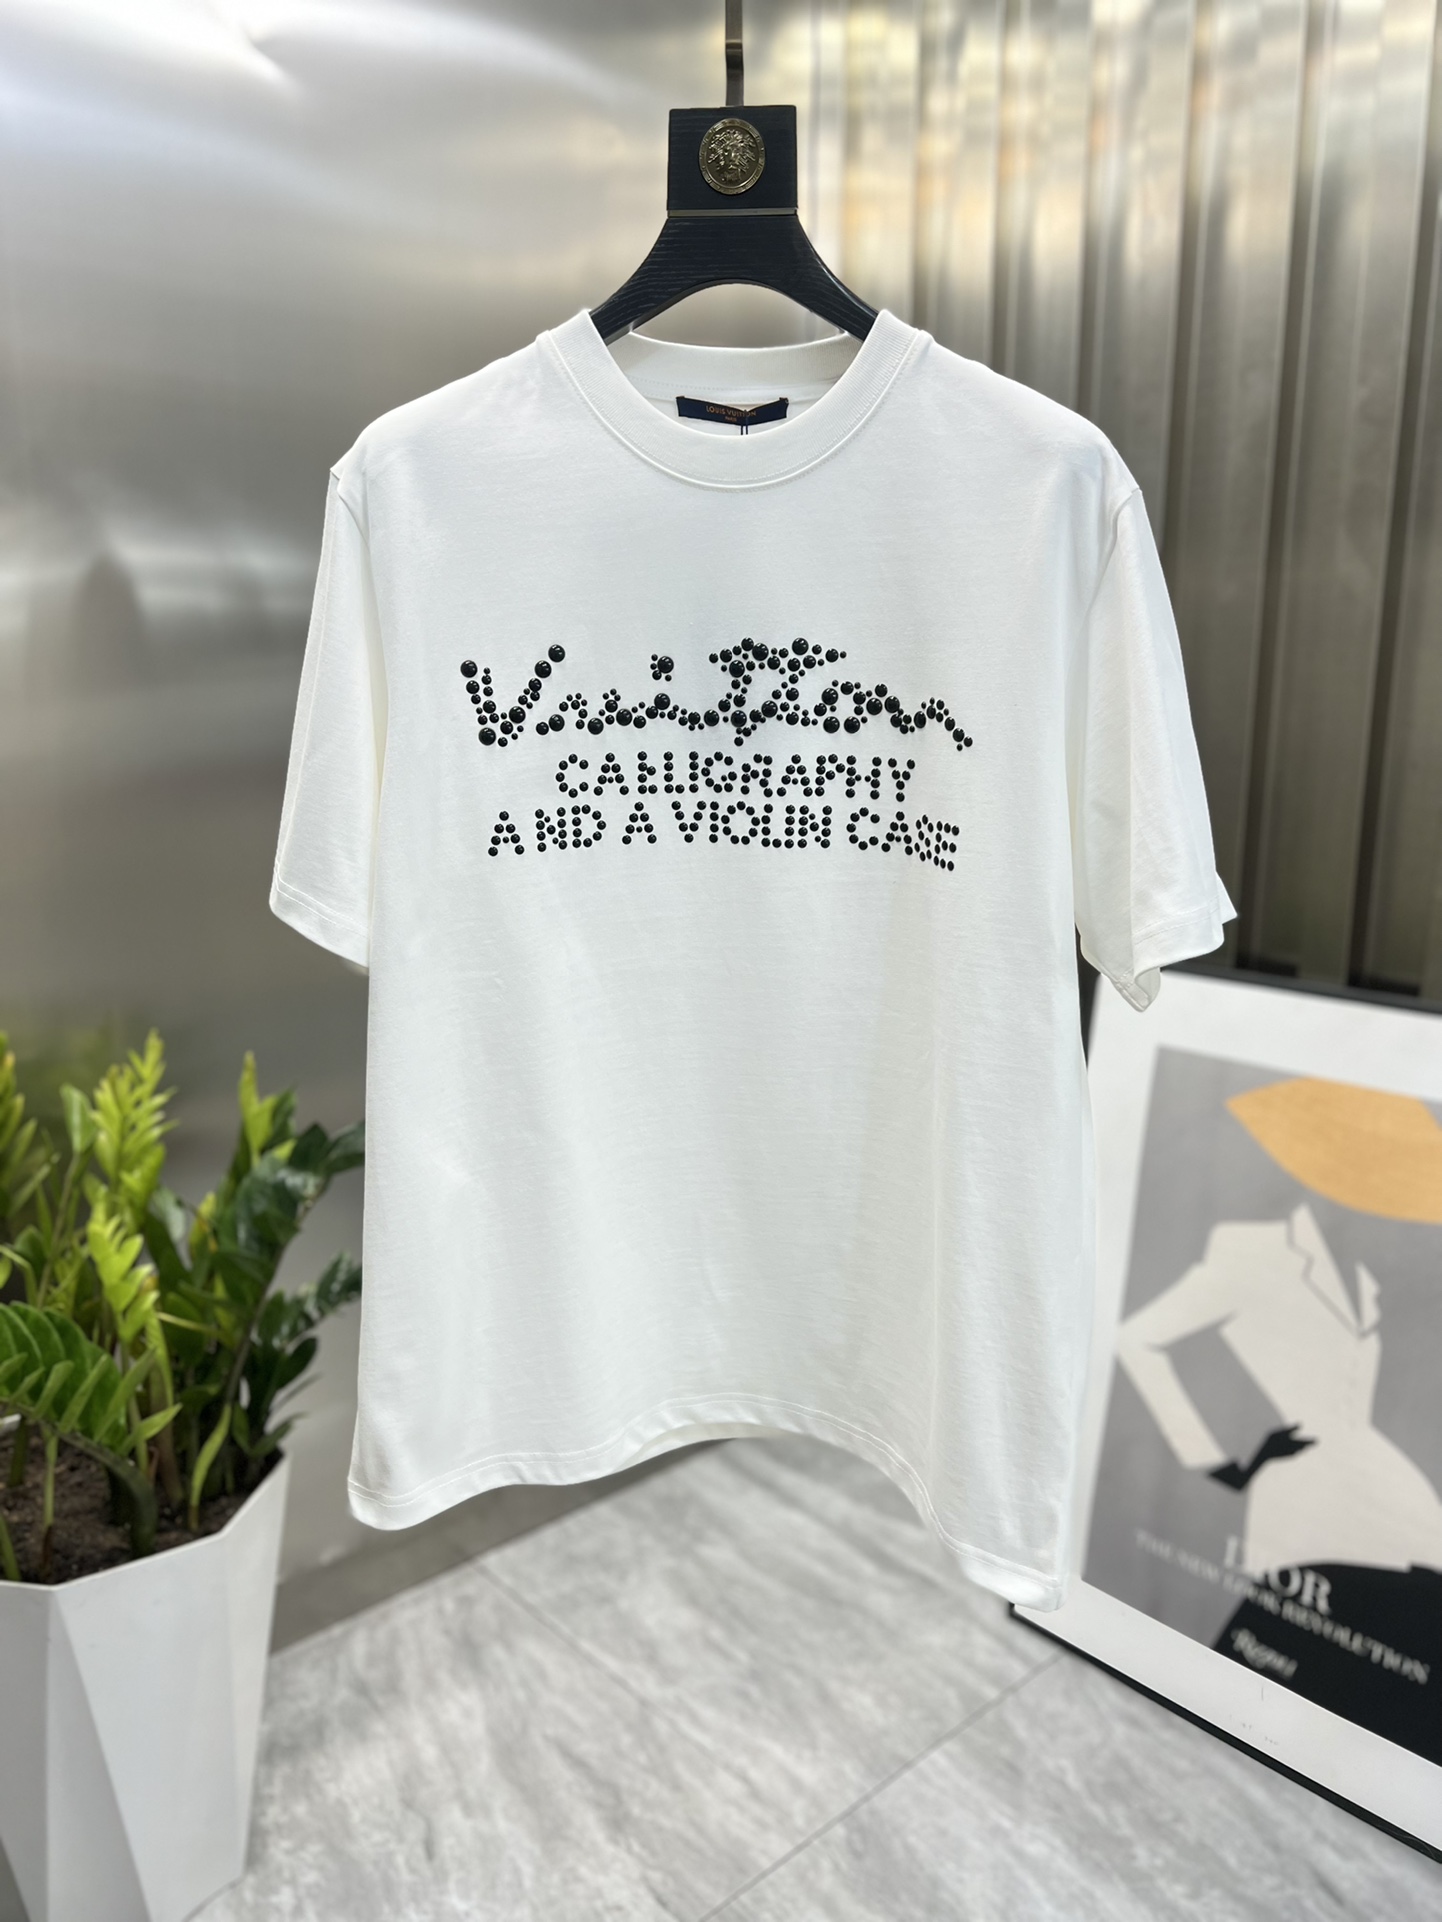 Louis Vuitton Clothing T-Shirt Spring/Summer Collection Short Sleeve